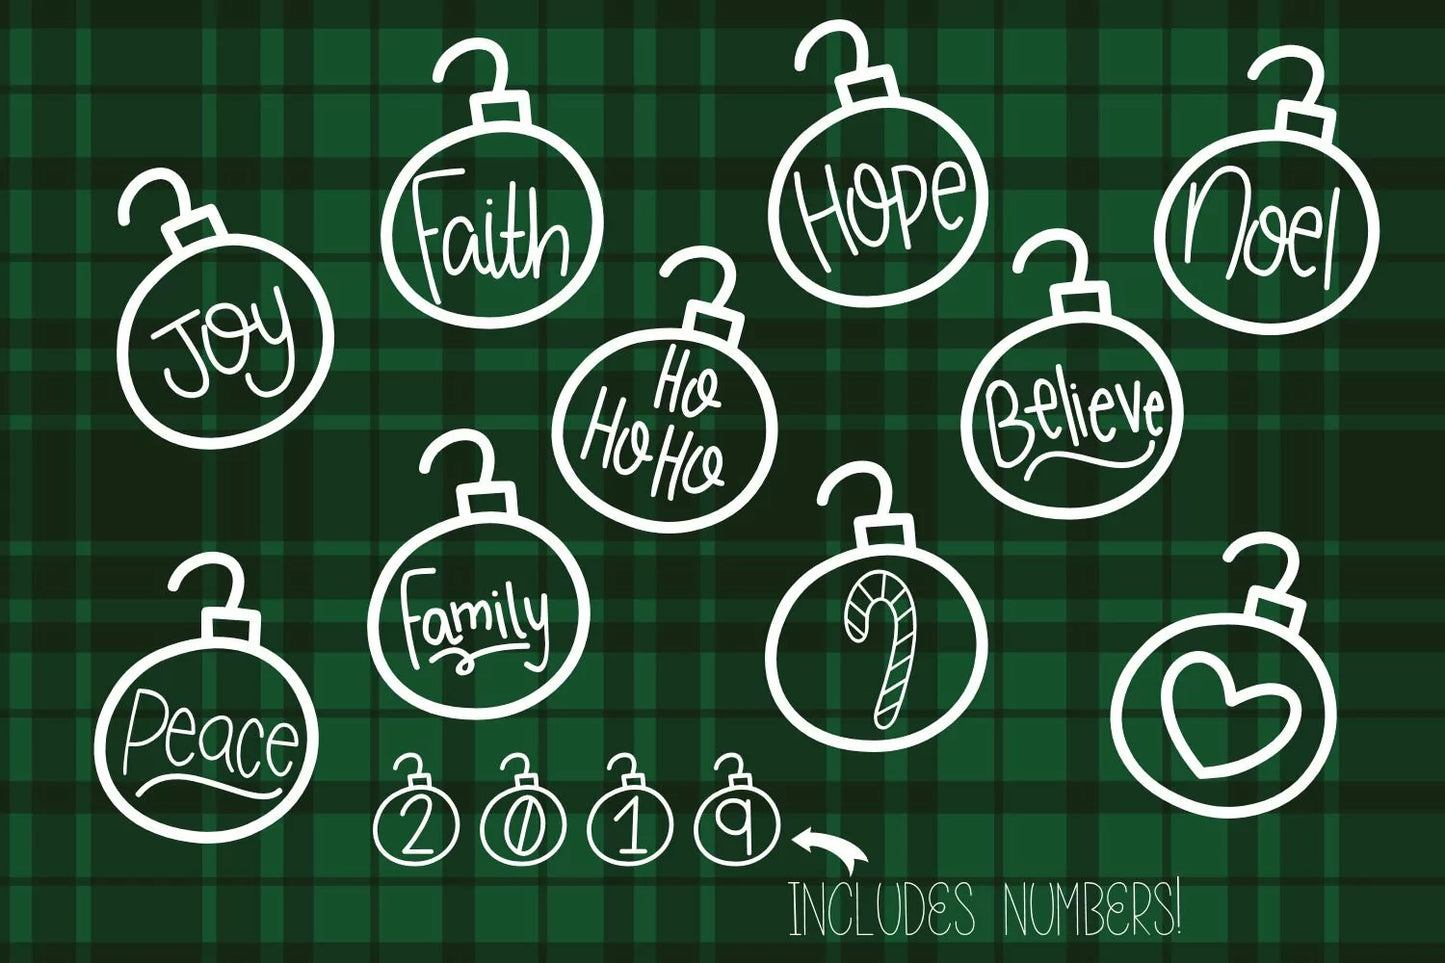 Christmas Baubles - A Handwritten Christmas Font With Doodles